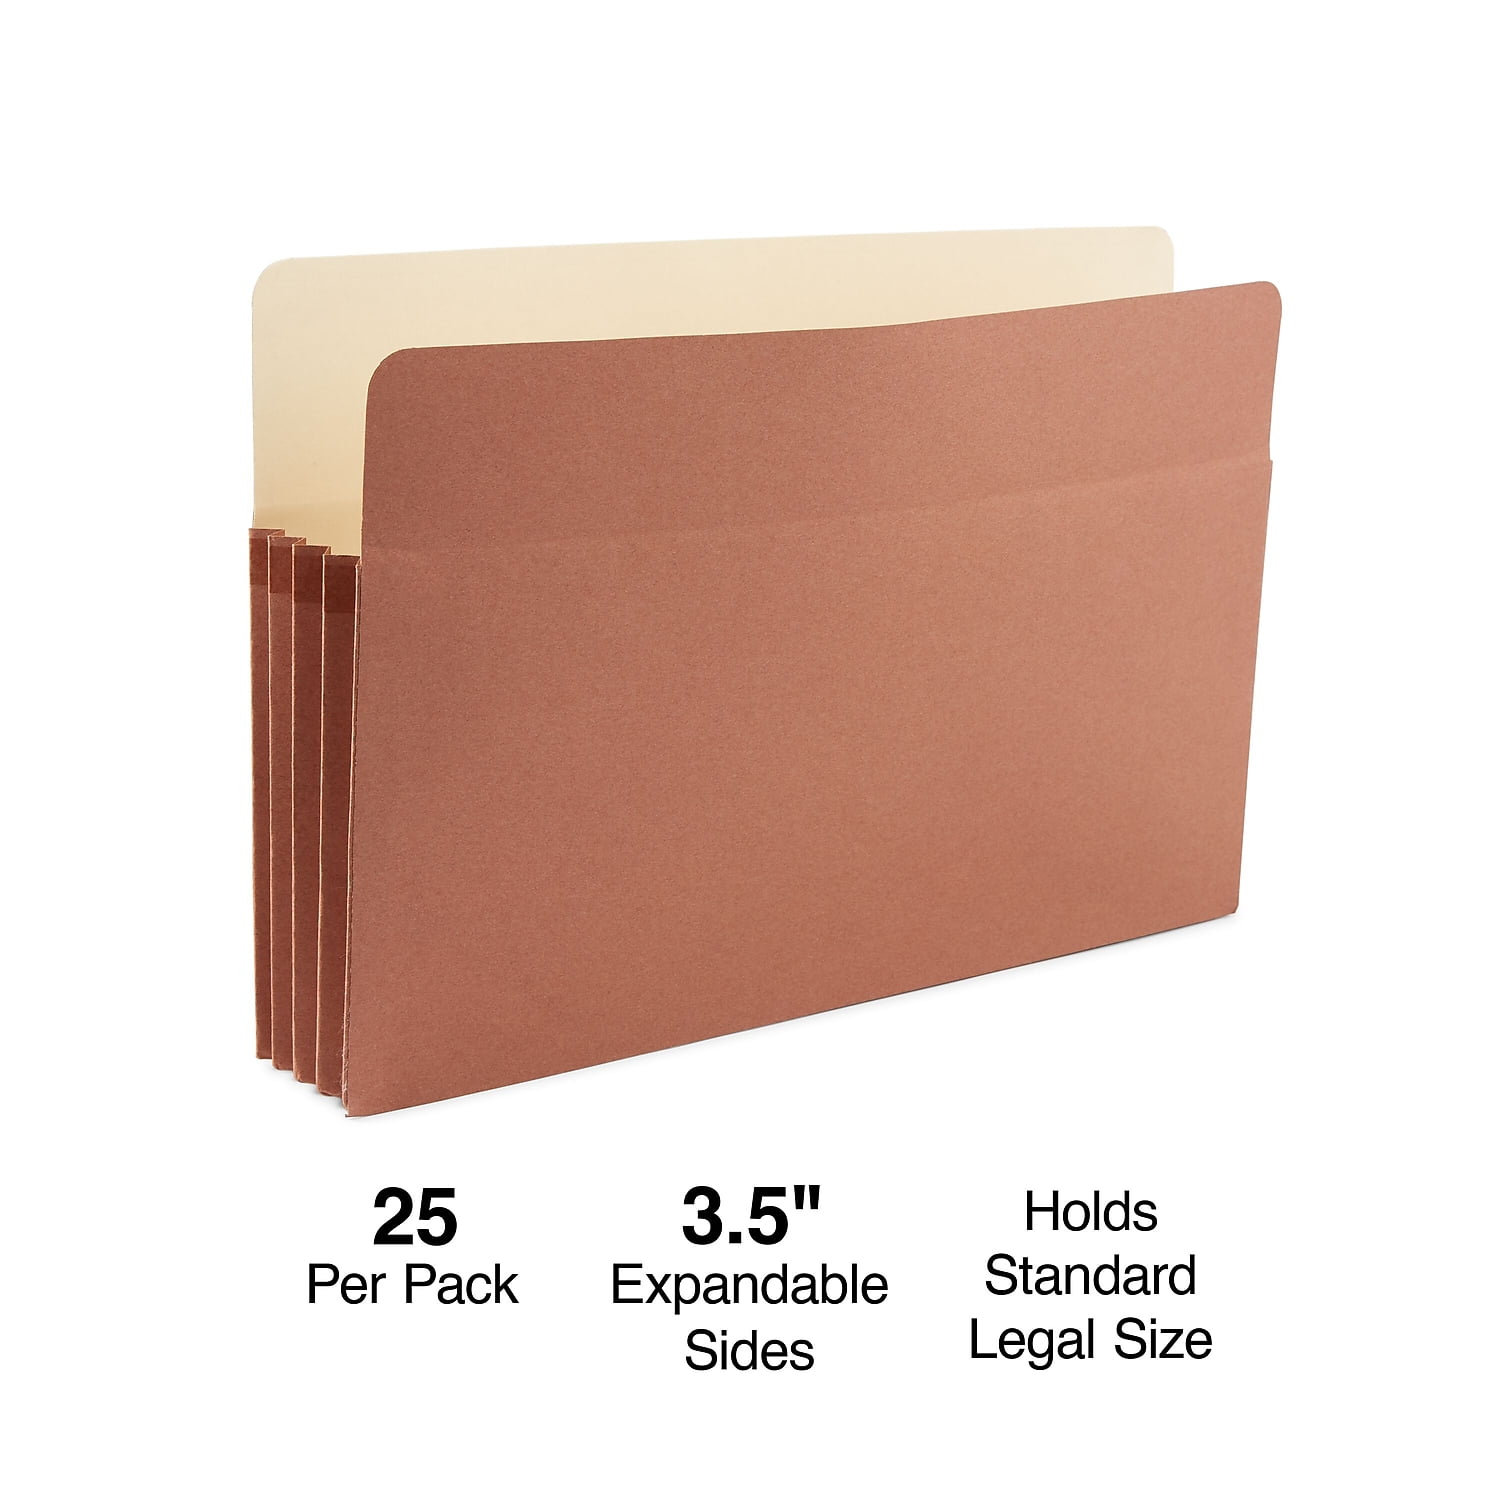 Redrope 1524E-OX Letter Size 3.5 Expansion Pendaflex Expanding File Pockets Redrope Reinforced with DuPont Tyvek Material 25 per Box Fоur Расk 